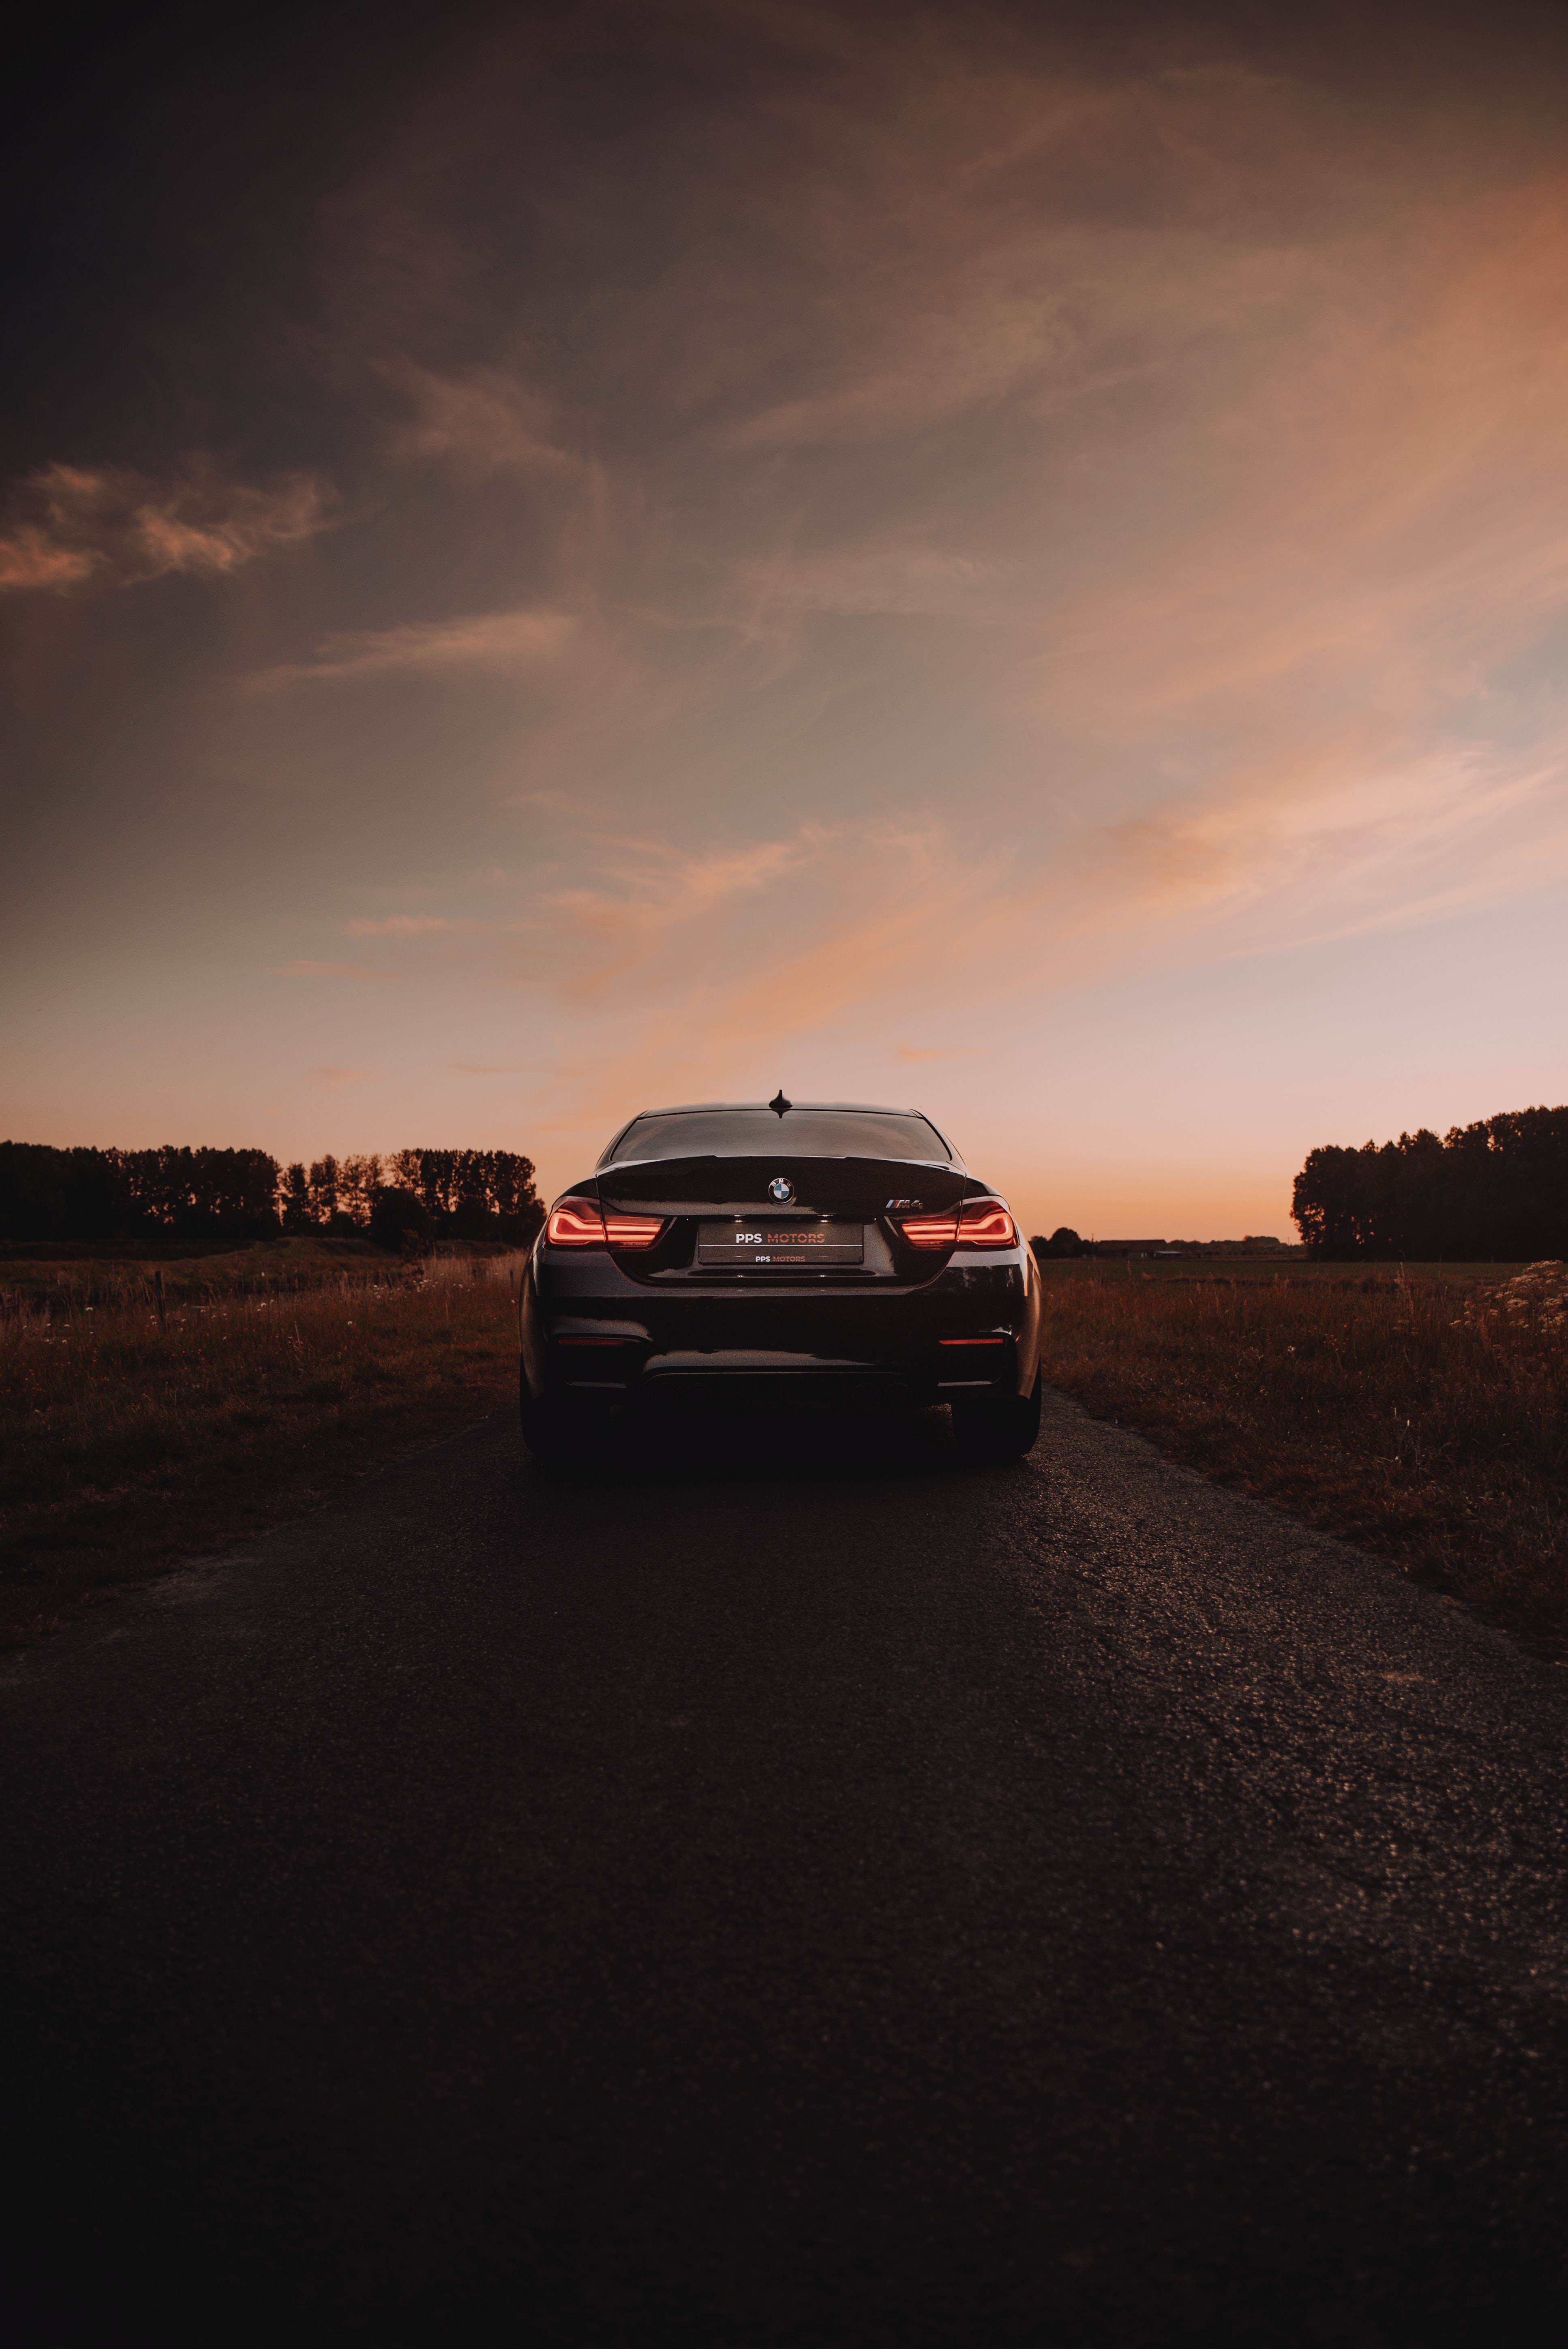 bmw, sports car, bmw m4, cars, sports, lights, car, back view, rear view, headlights wallpapers for tablet